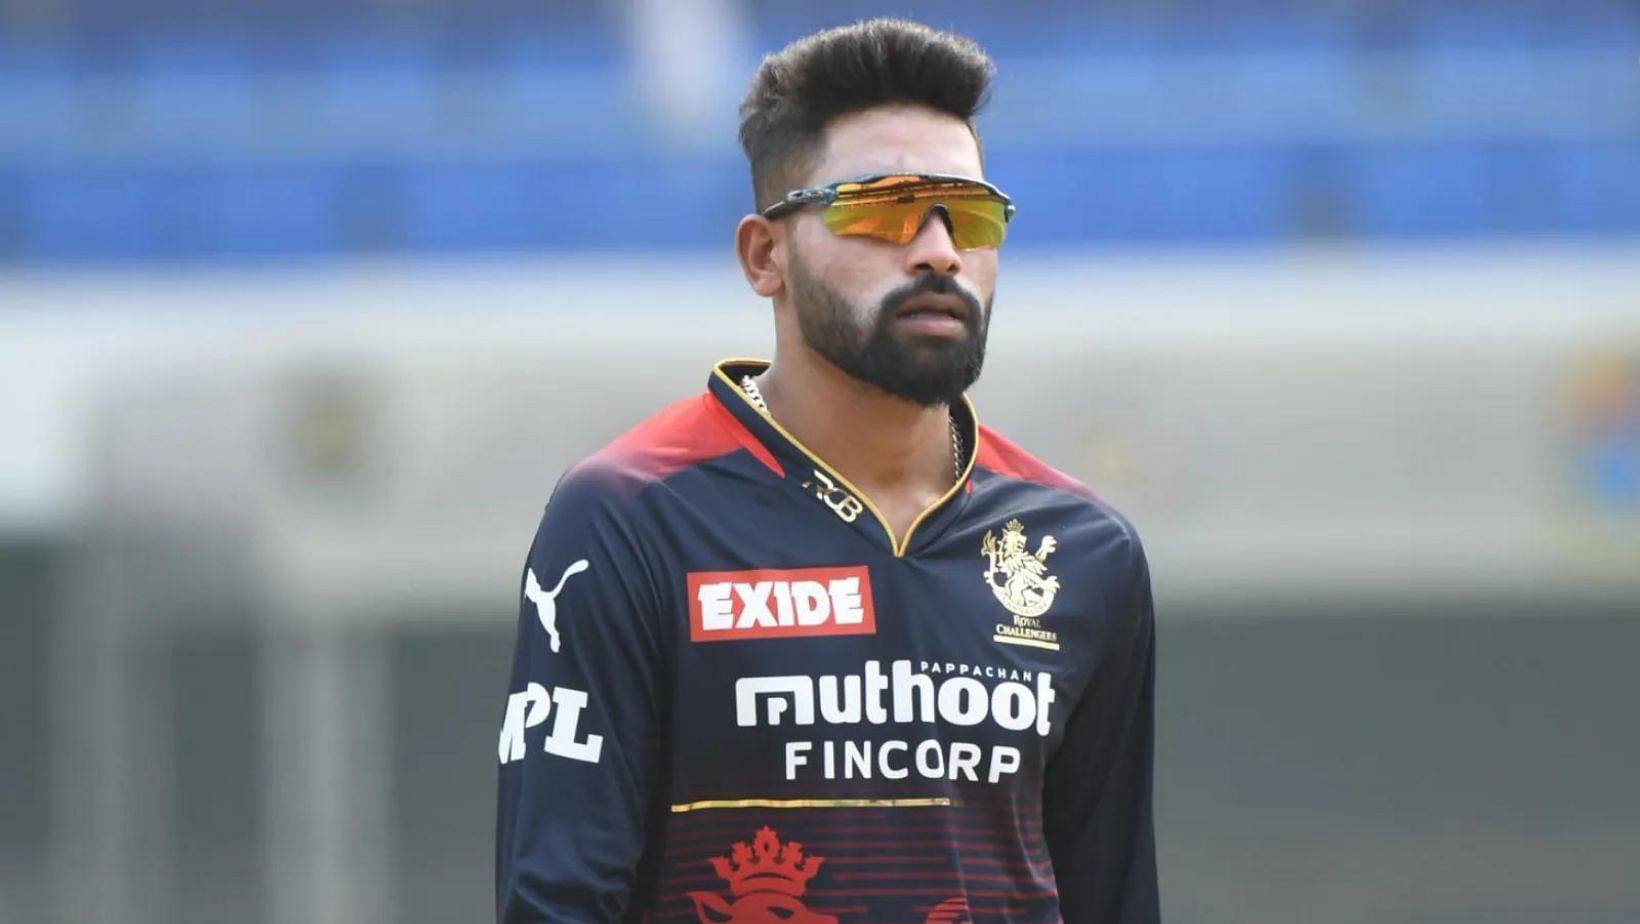 The India international has been dropped from the Royal Challengers Bangalore playing XI.